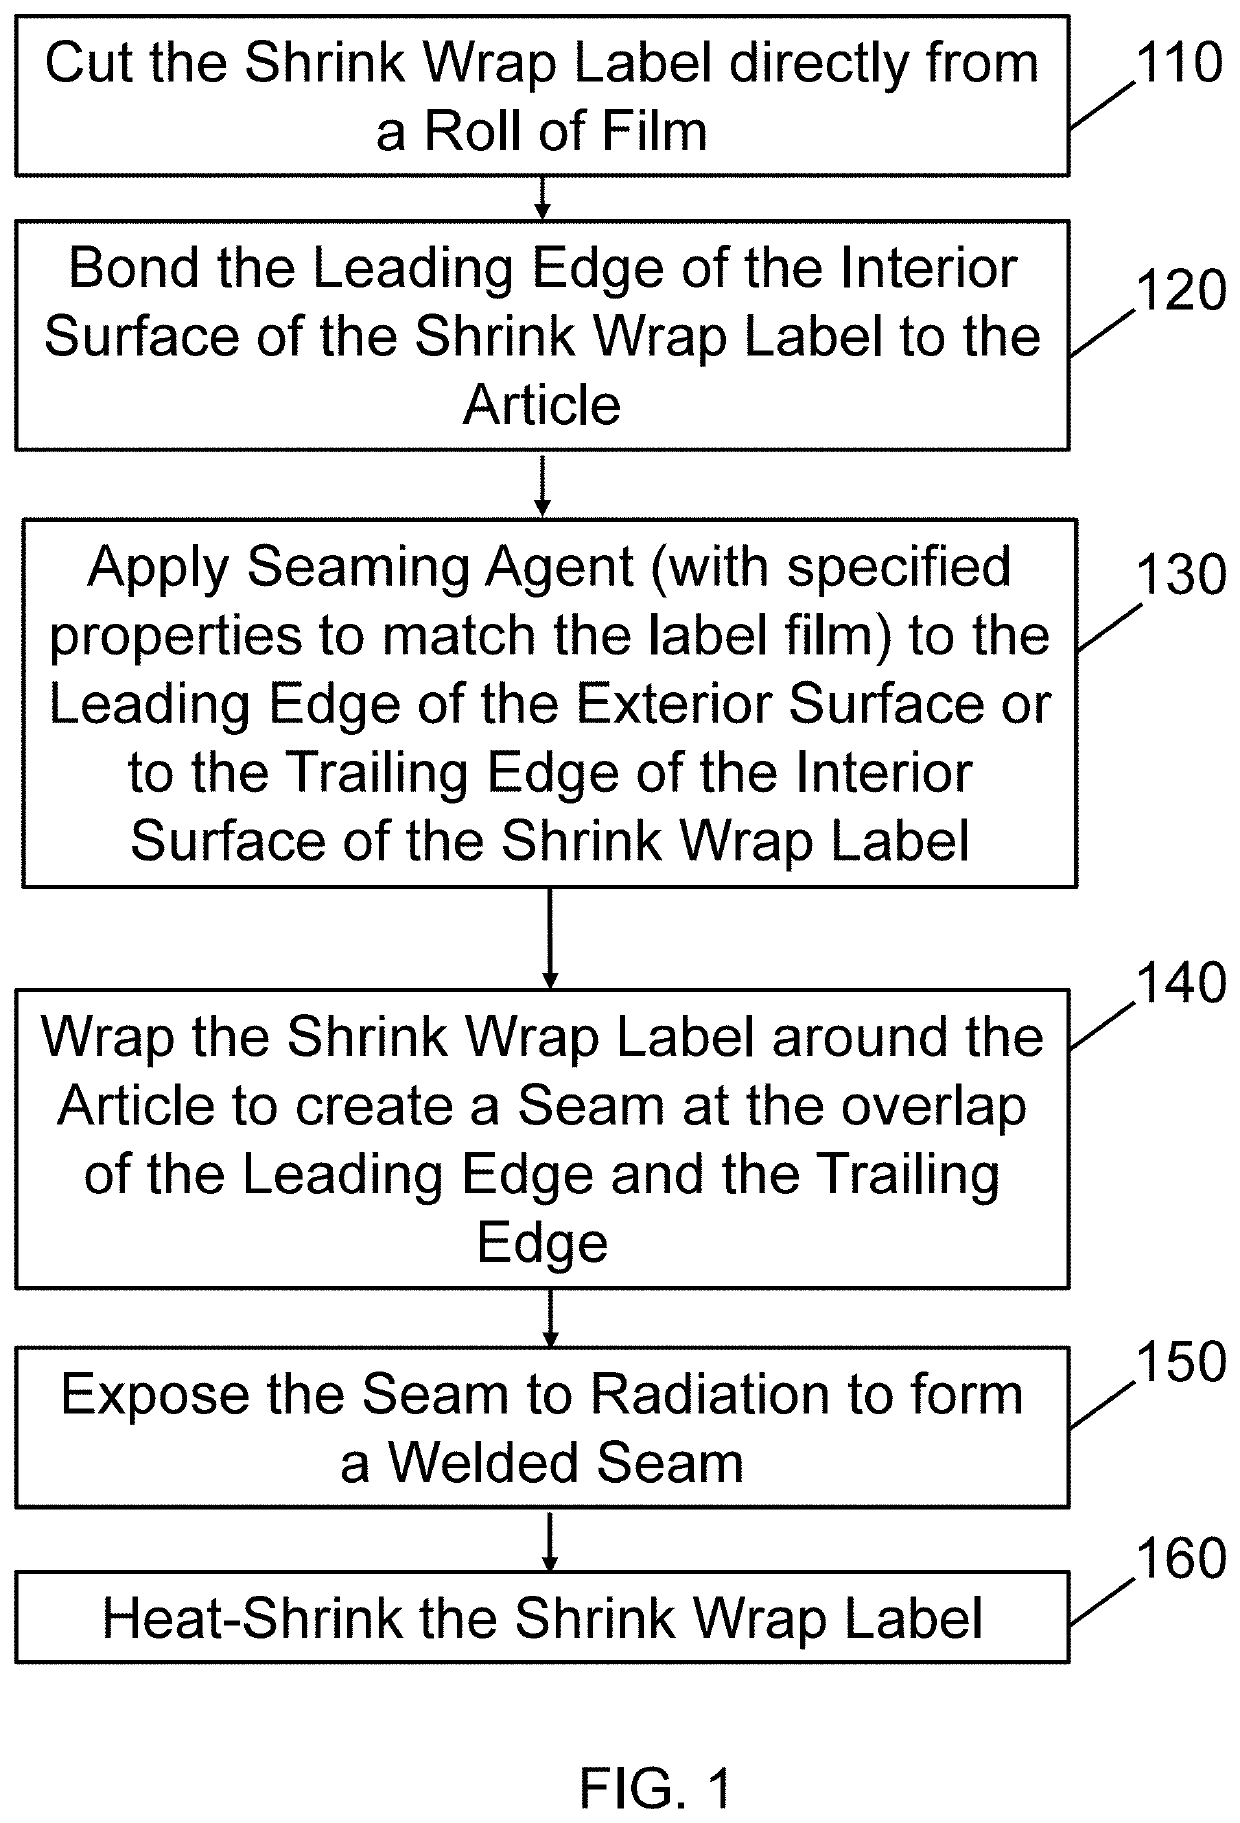 Shrink wrap labels for shaped articles